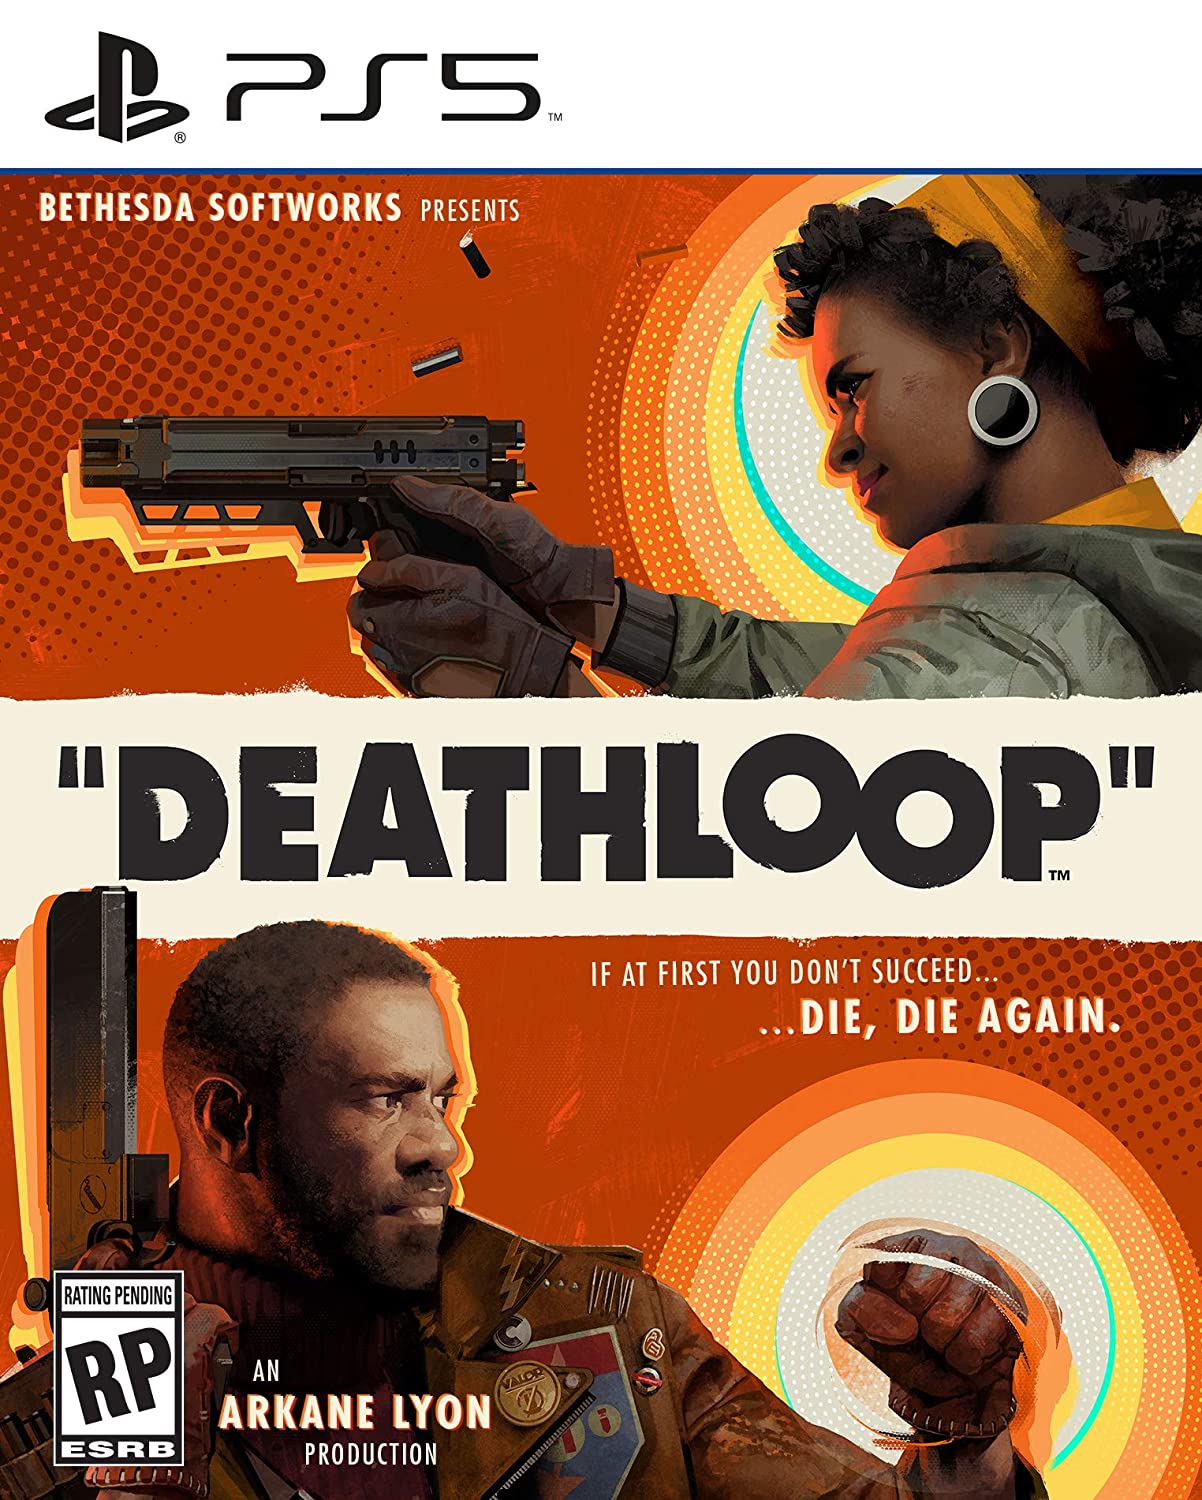 PlayStation 5 exclusive ‘Deathloop’ will hit Xbox after September 14, 2022